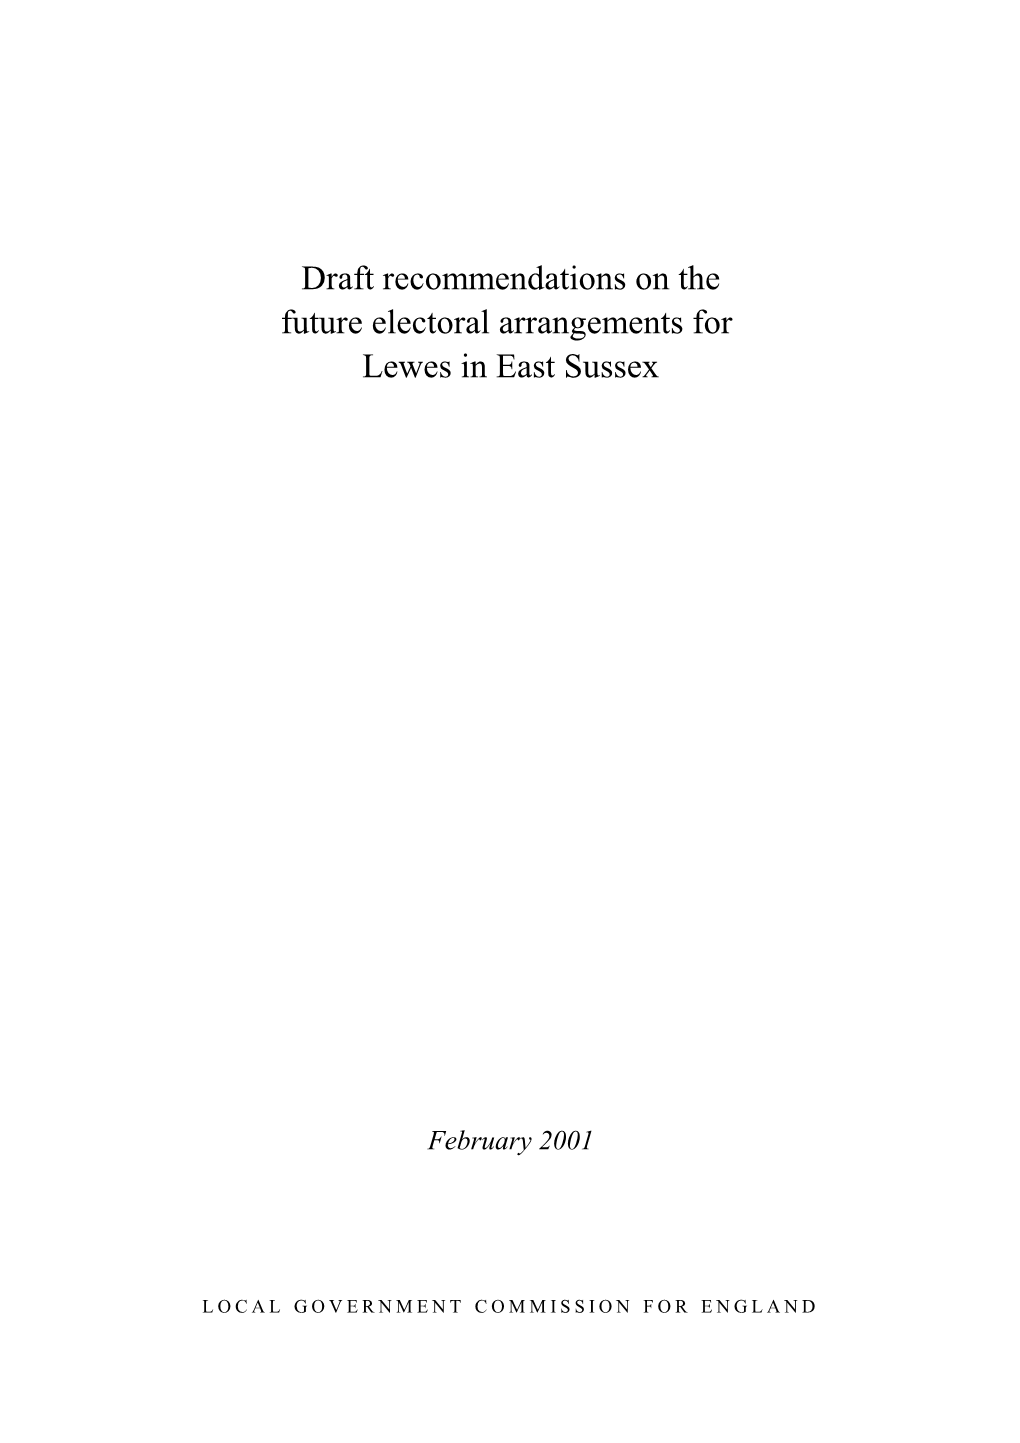 Draft Recommendations on the Future Electoral Arrangements for Lewes in East Sussex